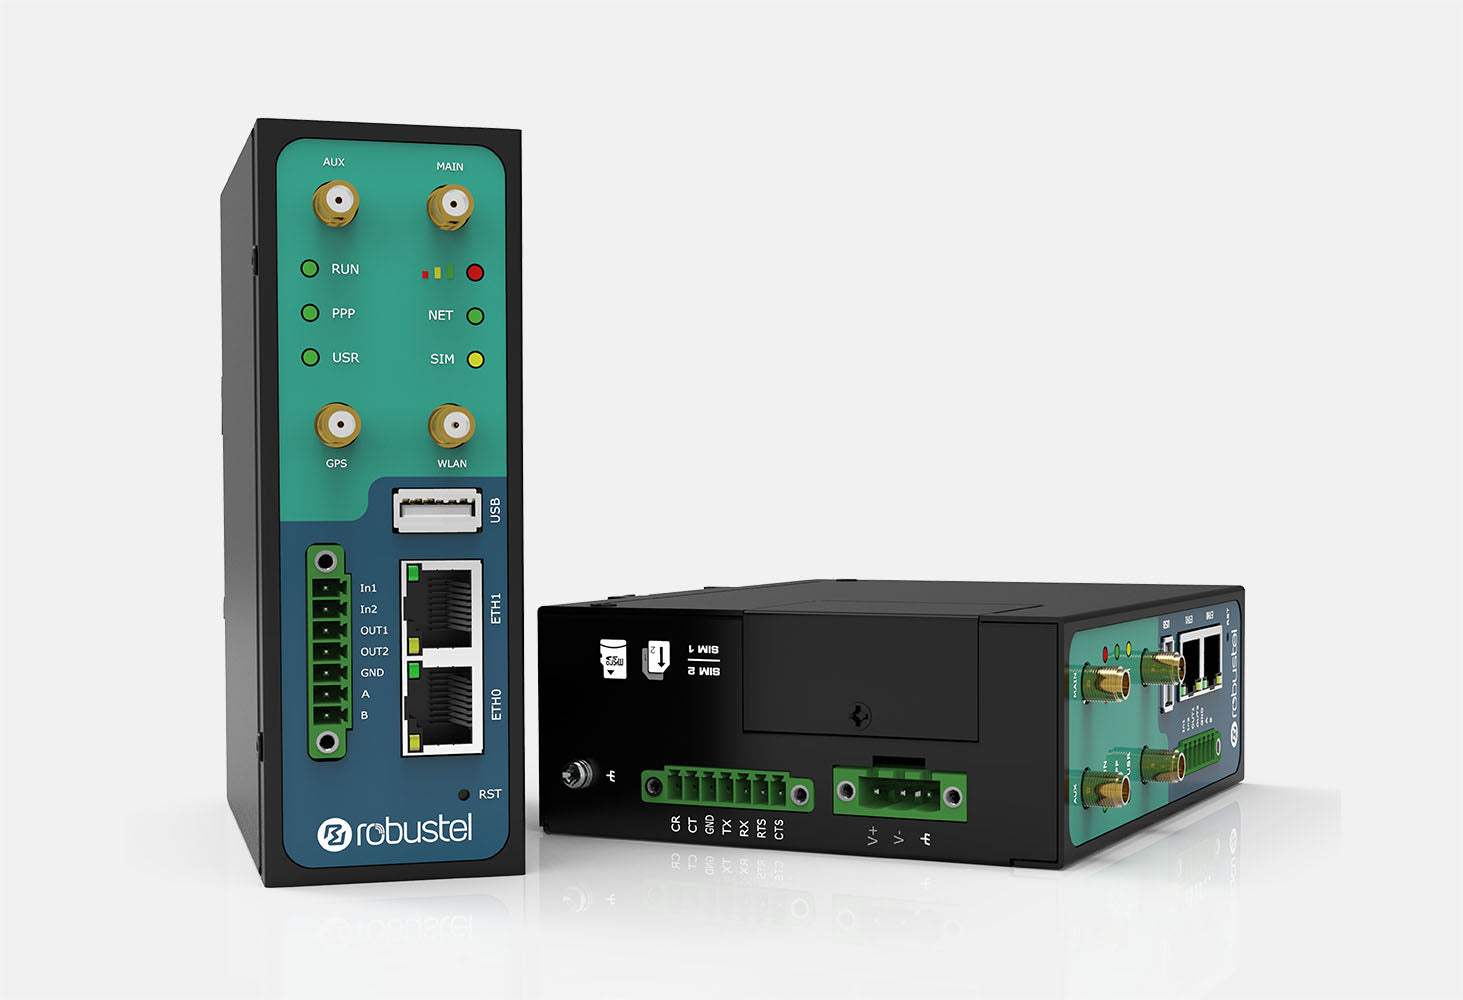 R3000 Industrial LTE Router Series